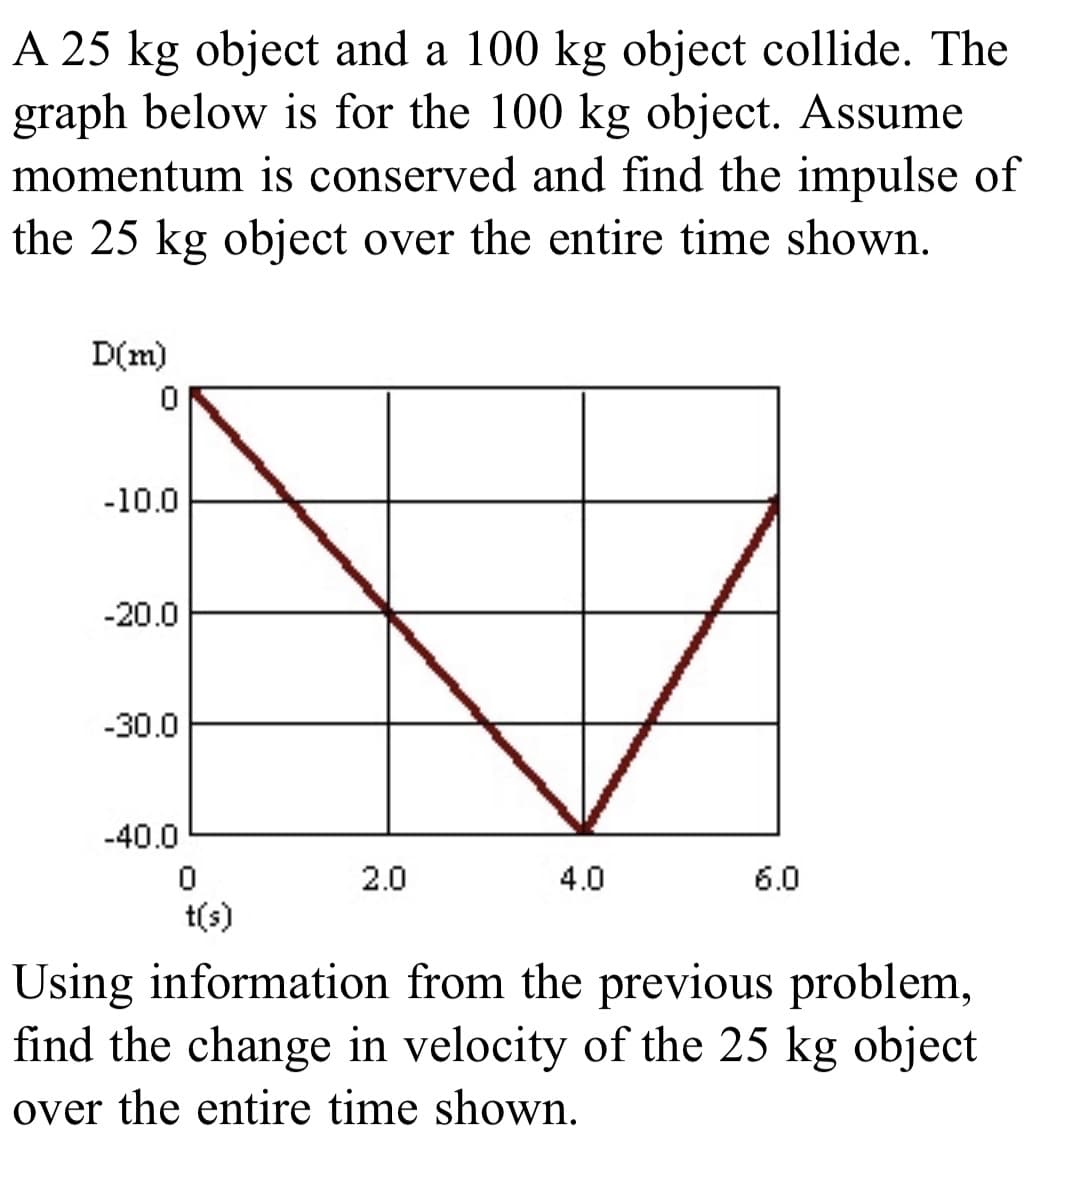 A 25 kg object and a 100 kg object collide. The
graph below is for the 100 kg object. Assume
momentum is conserved and find the impulse of
the 25 kg object over the entire time shown.
D(m)
-10.0
-20.0
-30.0
-40.0
2.0
4.0
6.0
t(s)
Using information from the previous problem,
find the change in velocity of the 25 kg object
over the entire time shown.
